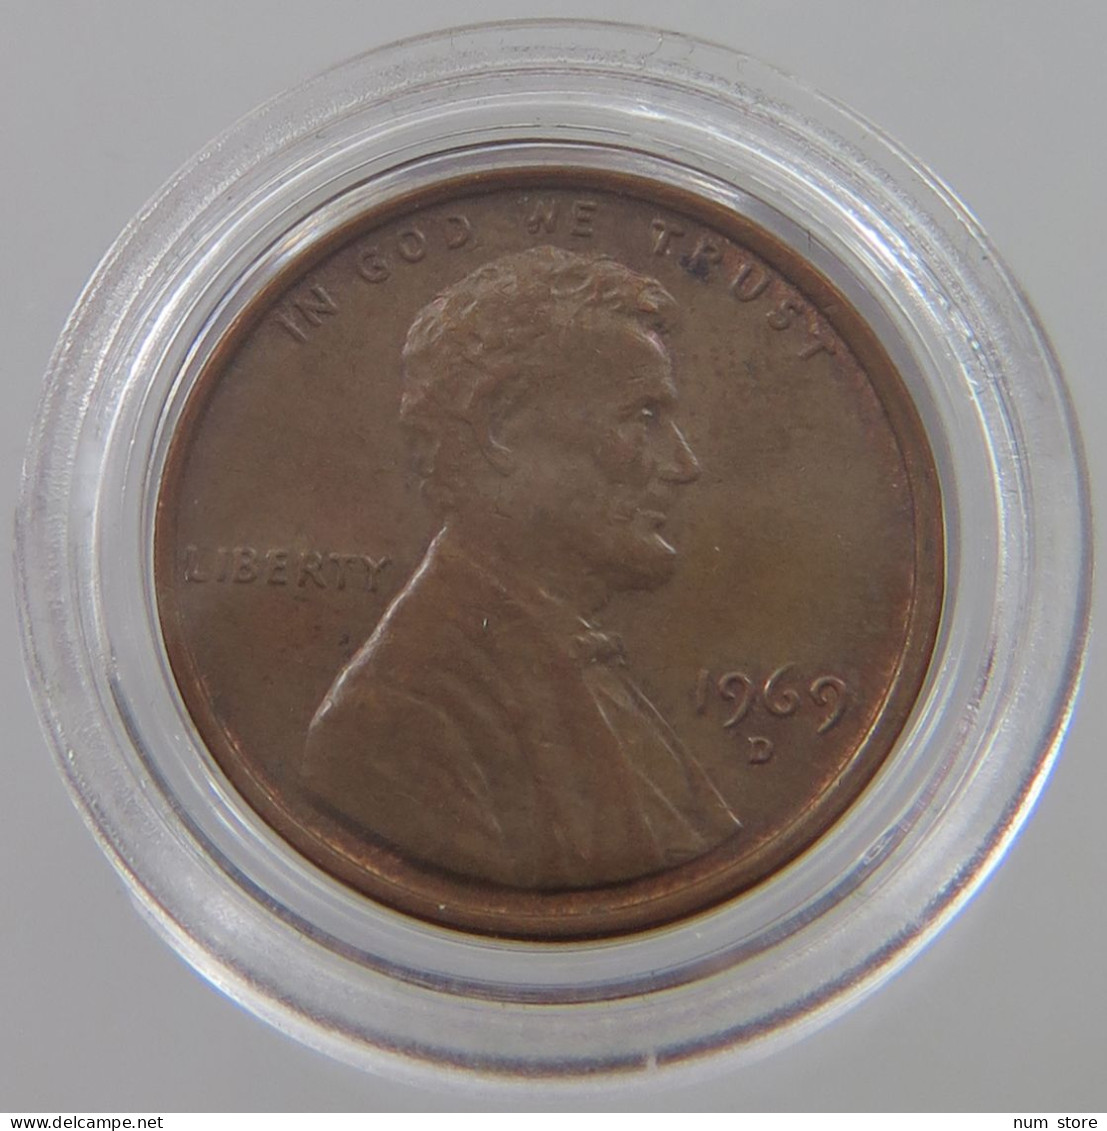 UNITED STATES OF AMERICA CENT 1969 D LINCOLN MEMORIAL #alb024 0053 - 1959-…: Lincoln, Memorial Reverse